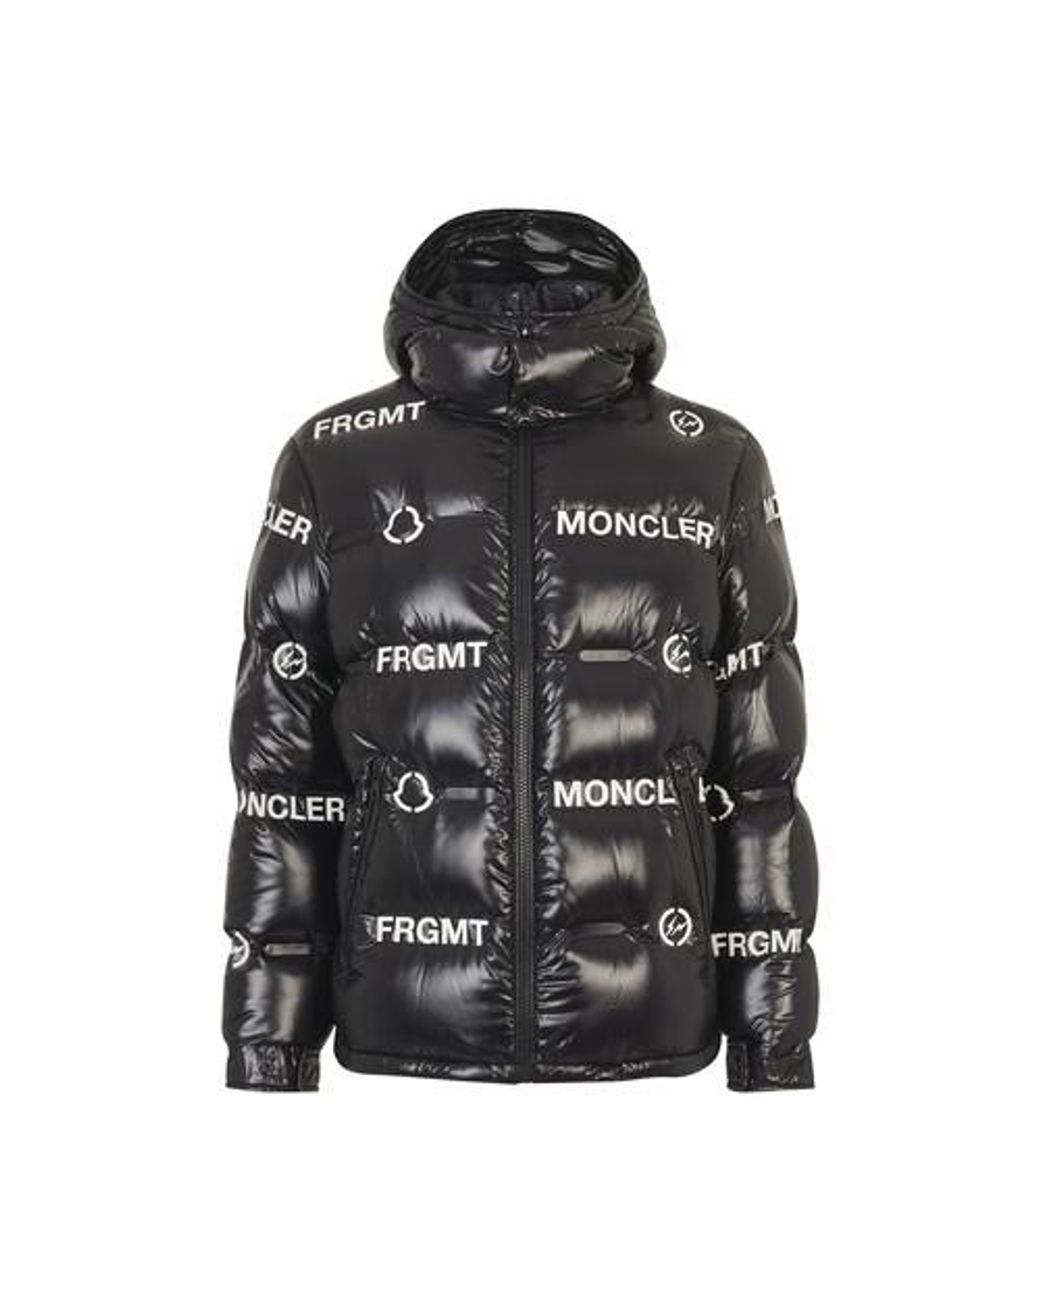 Moncler Genius X Fragment - Mayconne Down Jacket in Black for Men | Lyst